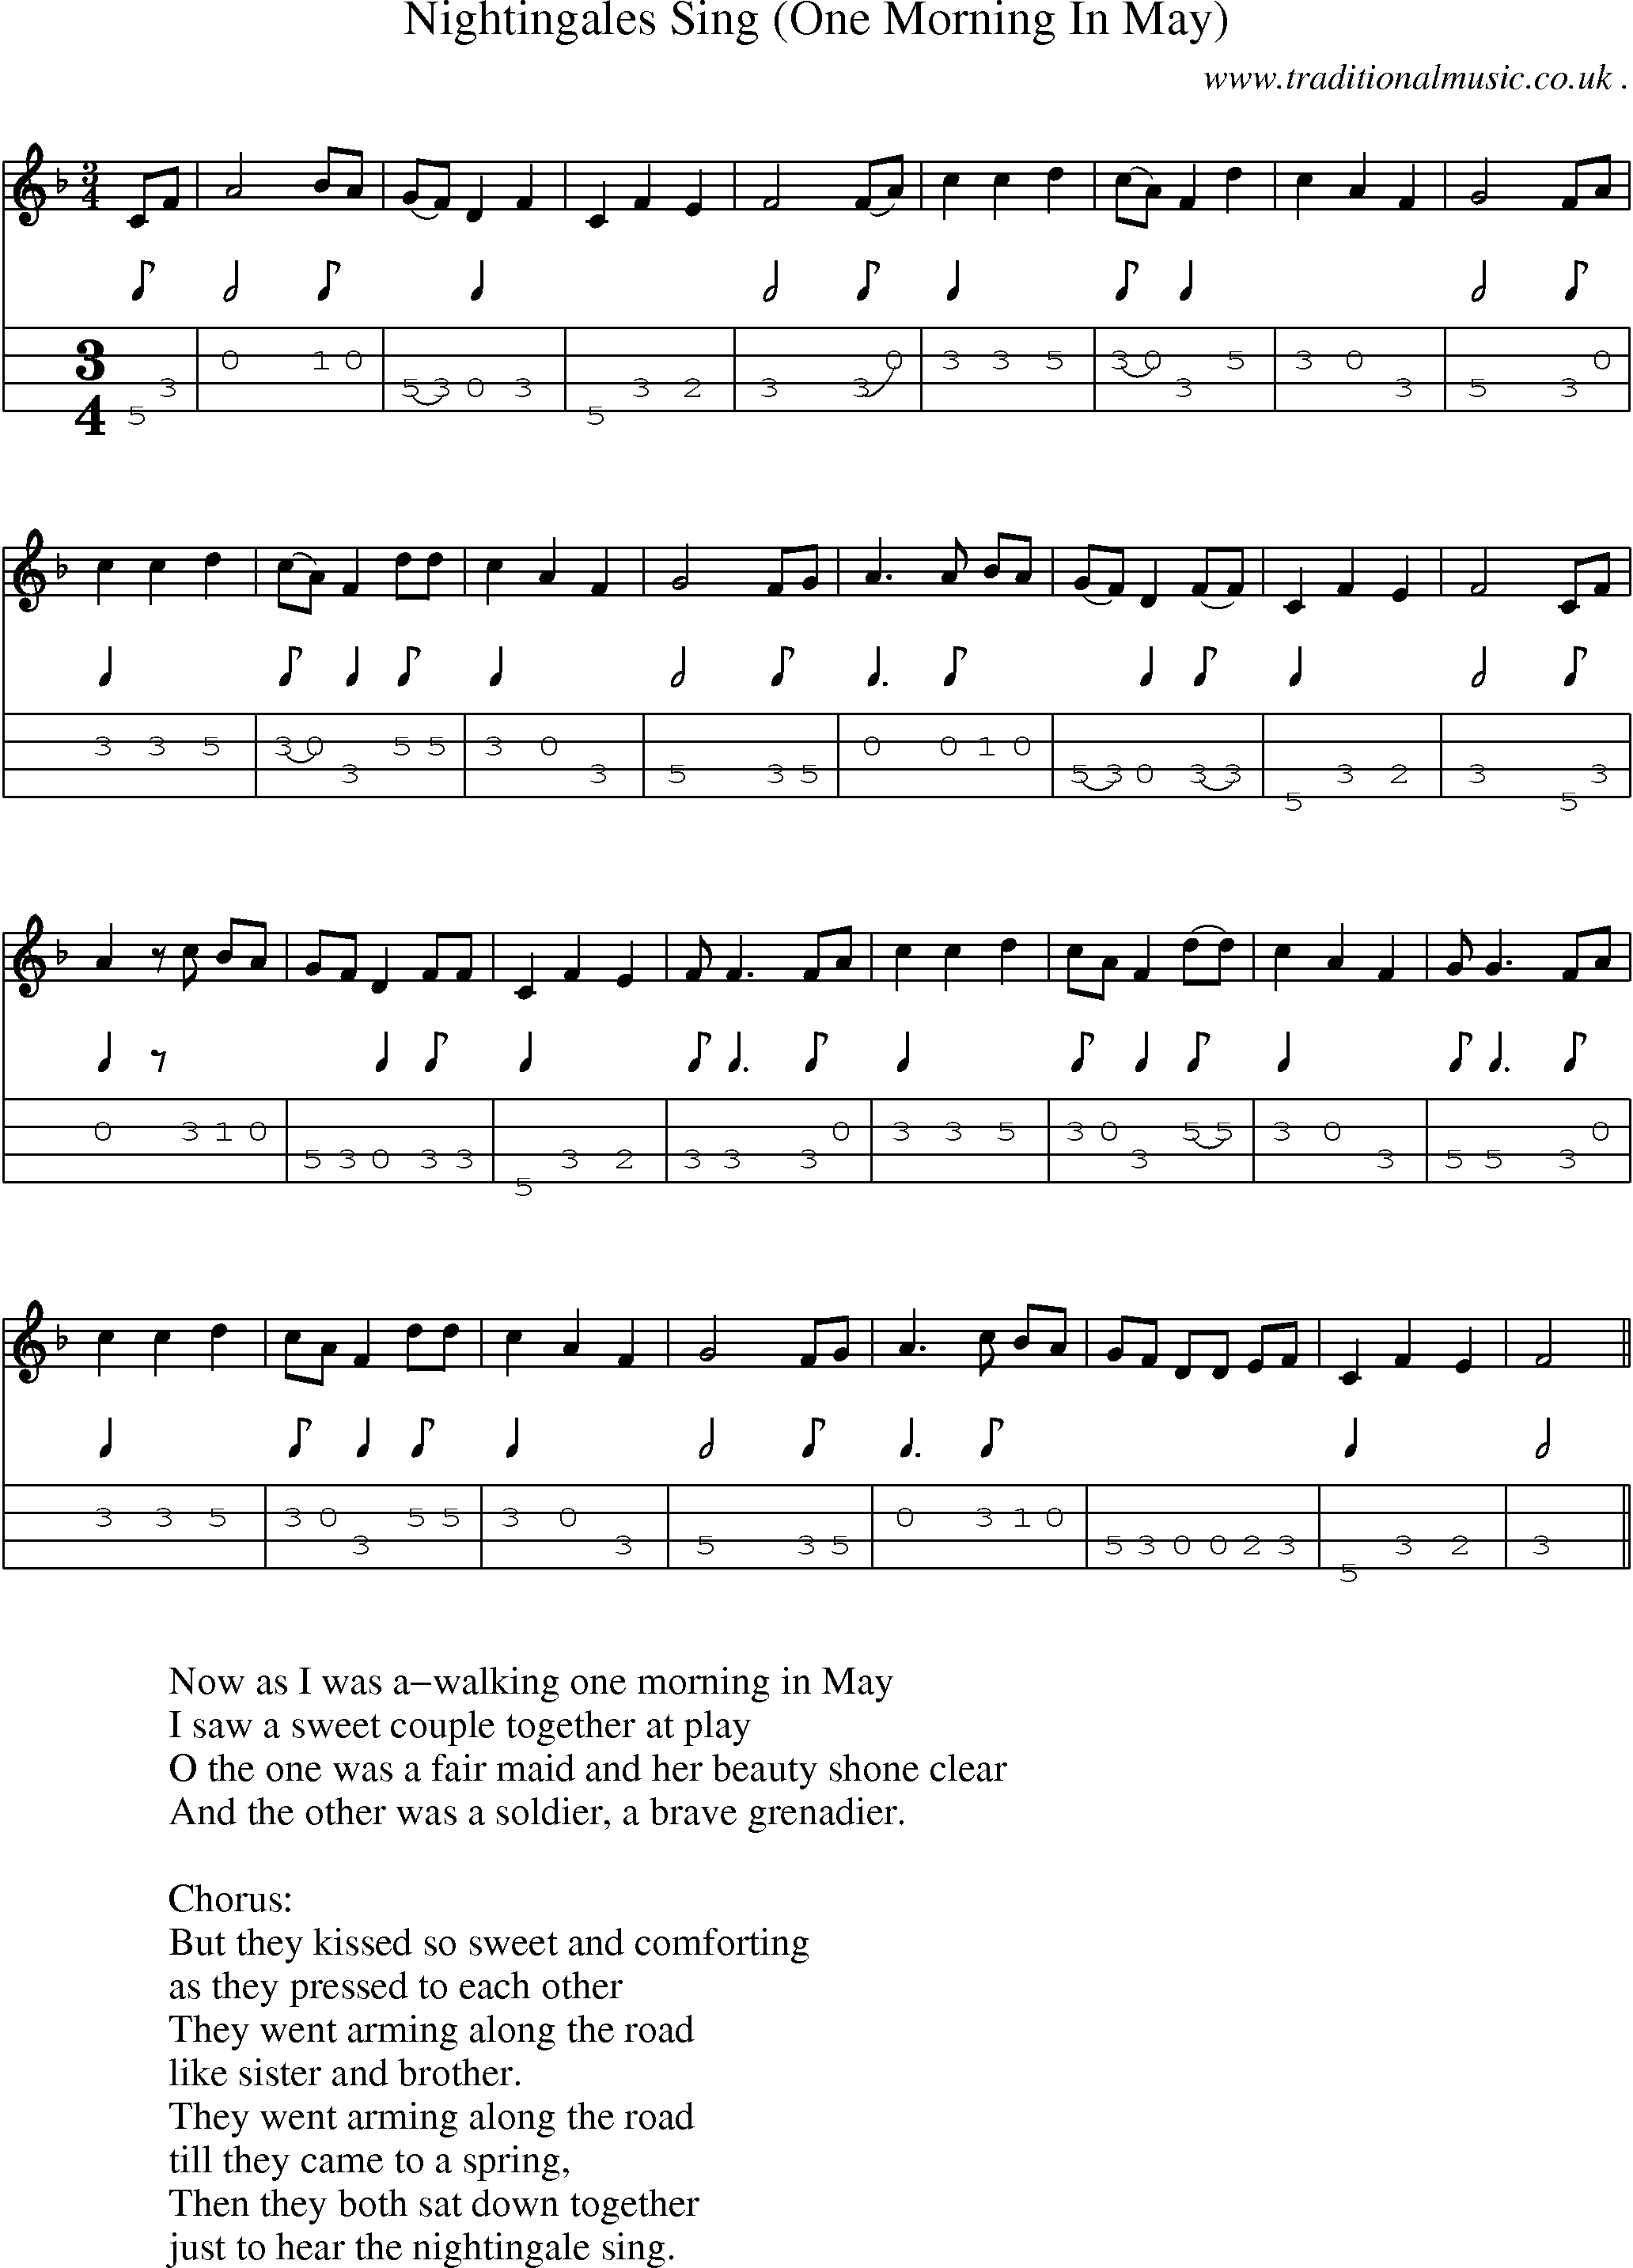 Sheet-Music and Mandolin Tabs for Nightingales Sing (one Morning In May)